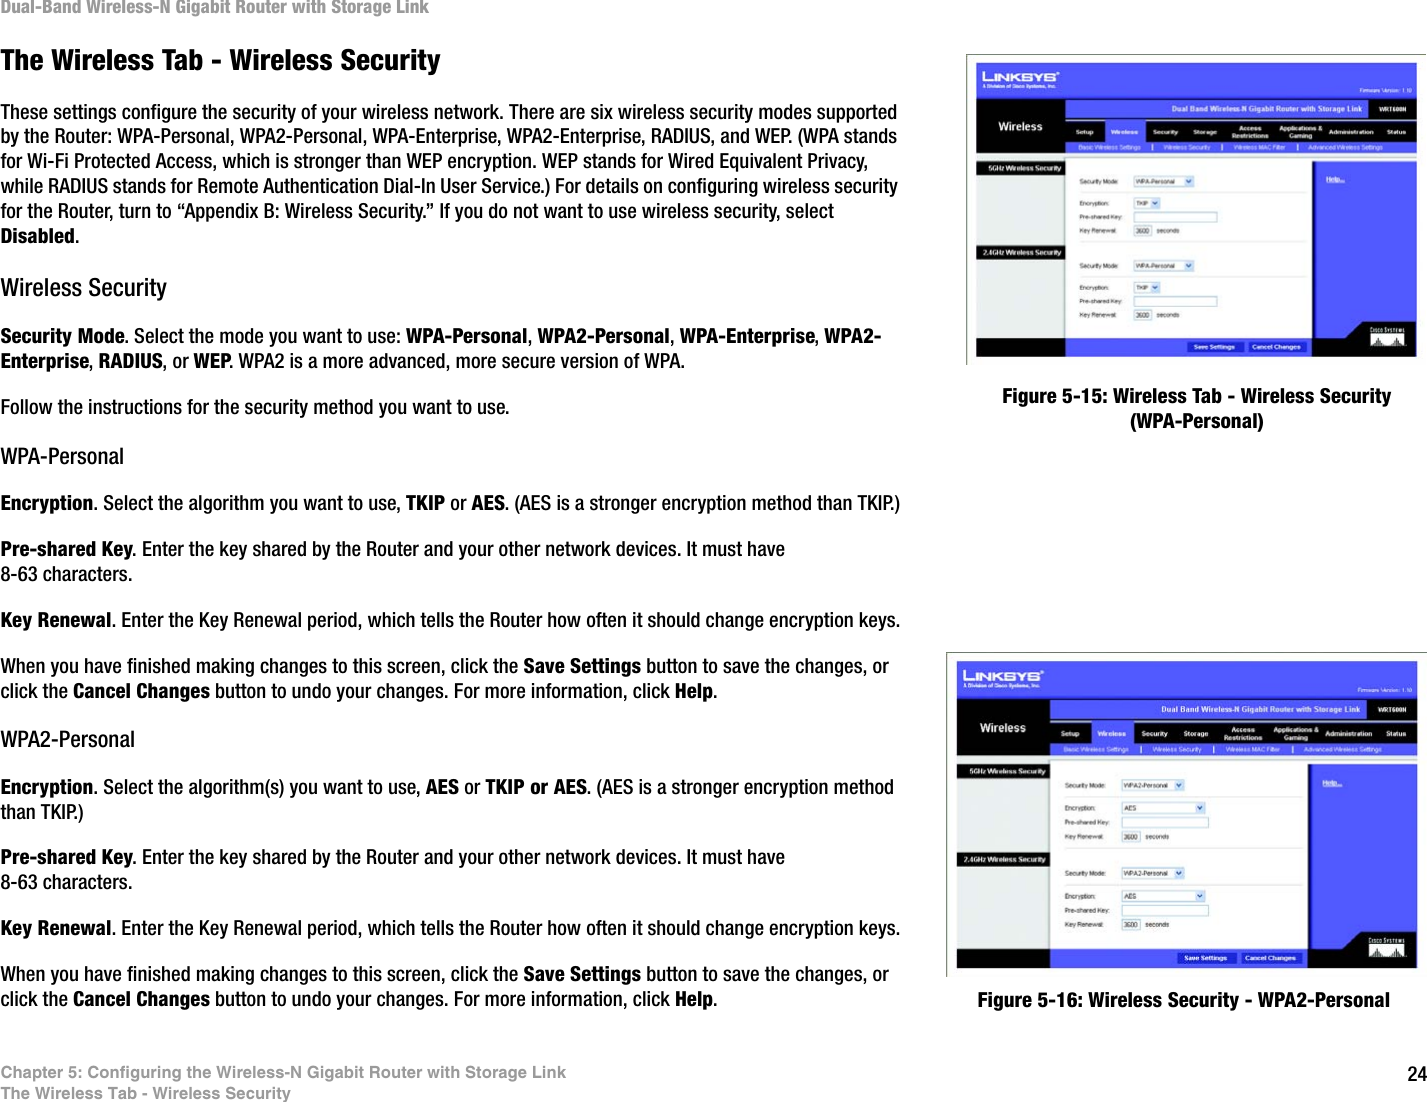 24Chapter 5: Configuring the Wireless-N Gigabit Router with Storage LinkThe Wireless Tab - Wireless SecurityDual-Band Wireless-N Gigabit Router with Storage LinkThe Wireless Tab - Wireless SecurityThese settings configure the security of your wireless network. There are six wireless security modes supported by the Router: WPA-Personal, WPA2-Personal, WPA-Enterprise, WPA2-Enterprise, RADIUS, and WEP. (WPA stands for Wi-Fi Protected Access, which is stronger than WEP encryption. WEP stands for Wired Equivalent Privacy, while RADIUS stands for Remote Authentication Dial-In User Service.) For details on configuring wireless security for the Router, turn to “Appendix B: Wireless Security.” If you do not want to use wireless security, select Disabled.Wireless SecuritySecurity Mode. Select the mode you want to use: WPA-Personal, WPA2-Personal, WPA-Enterprise, WPA2-Enterprise, RADIUS, or WEP. WPA2 is a more advanced, more secure version of WPA.Follow the instructions for the security method you want to use. WPA-PersonalEncryption. Select the algorithm you want to use, TKIP or AES. (AES is a stronger encryption method than TKIP.)Pre-shared Key. Enter the key shared by the Router and your other network devices. It must have 8-63 characters.Key Renewal. Enter the Key Renewal period, which tells the Router how often it should change encryption keys.When you have finished making changes to this screen, click the Save Settings button to save the changes, or click the Cancel Changes button to undo your changes. For more information, click Help.WPA2-PersonalEncryption. Select the algorithm(s) you want to use, AES or TKIP or AES. (AES is a stronger encryption method than TKIP.)Pre-shared Key. Enter the key shared by the Router and your other network devices. It must have 8-63 characters.Key Renewal. Enter the Key Renewal period, which tells the Router how often it should change encryption keys.When you have finished making changes to this screen, click the Save Settings button to save the changes, or click the Cancel Changes button to undo your changes. For more information, click Help.Figure 5-15: Wireless Tab - Wireless Security (WPA-Personal)Figure 5-16: Wireless Security - WPA2-Personal